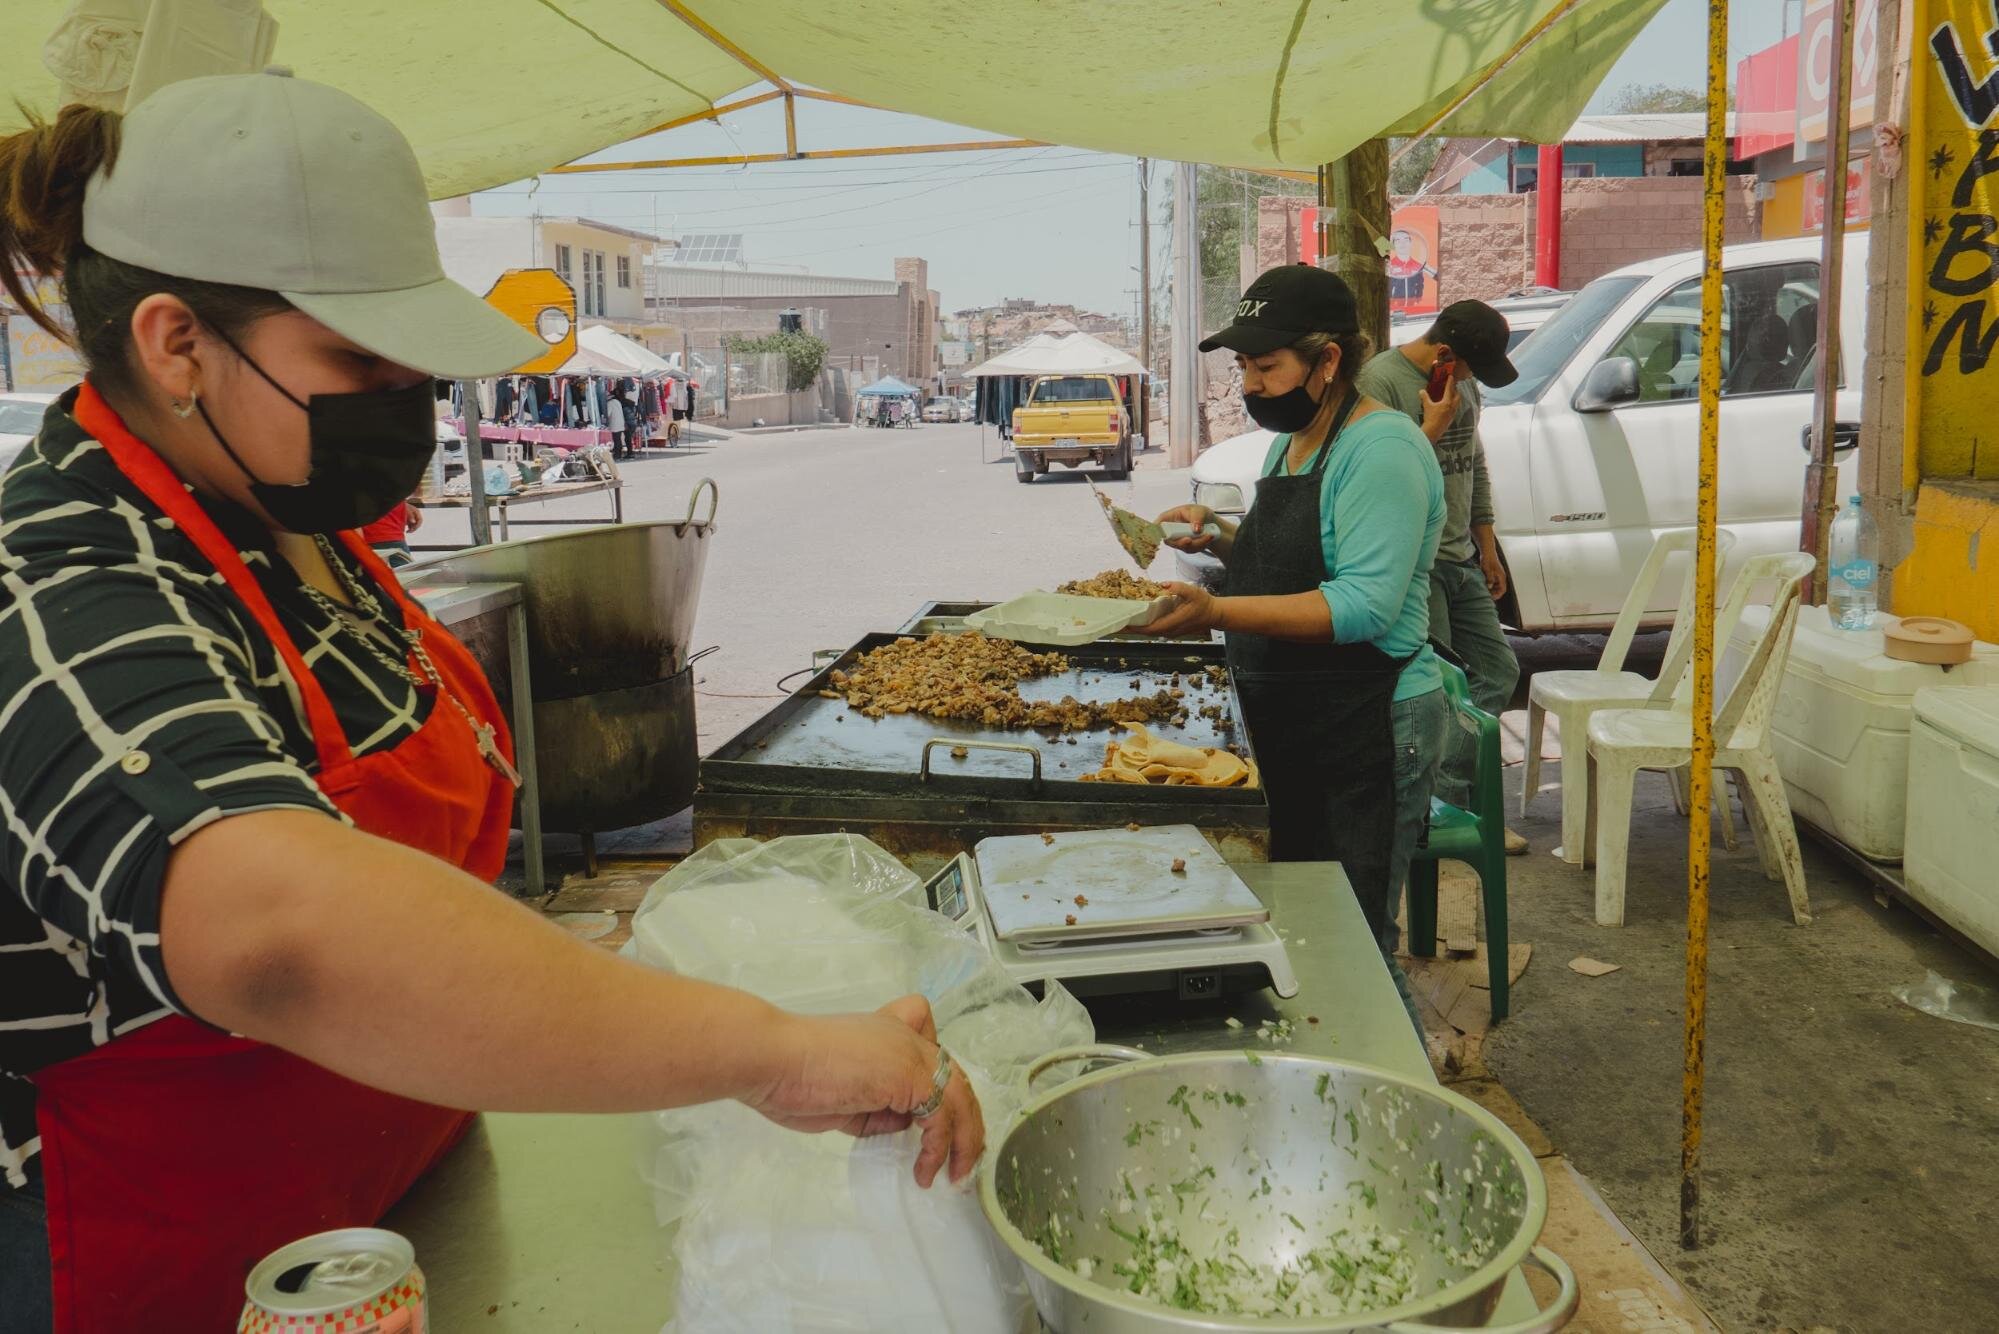   At Las Carnitas de Quiroga, cooks make pork rinds, chop vegetables and prepare sauces daily in a kitchen next to the street. Photo by Martiza L. Félix  